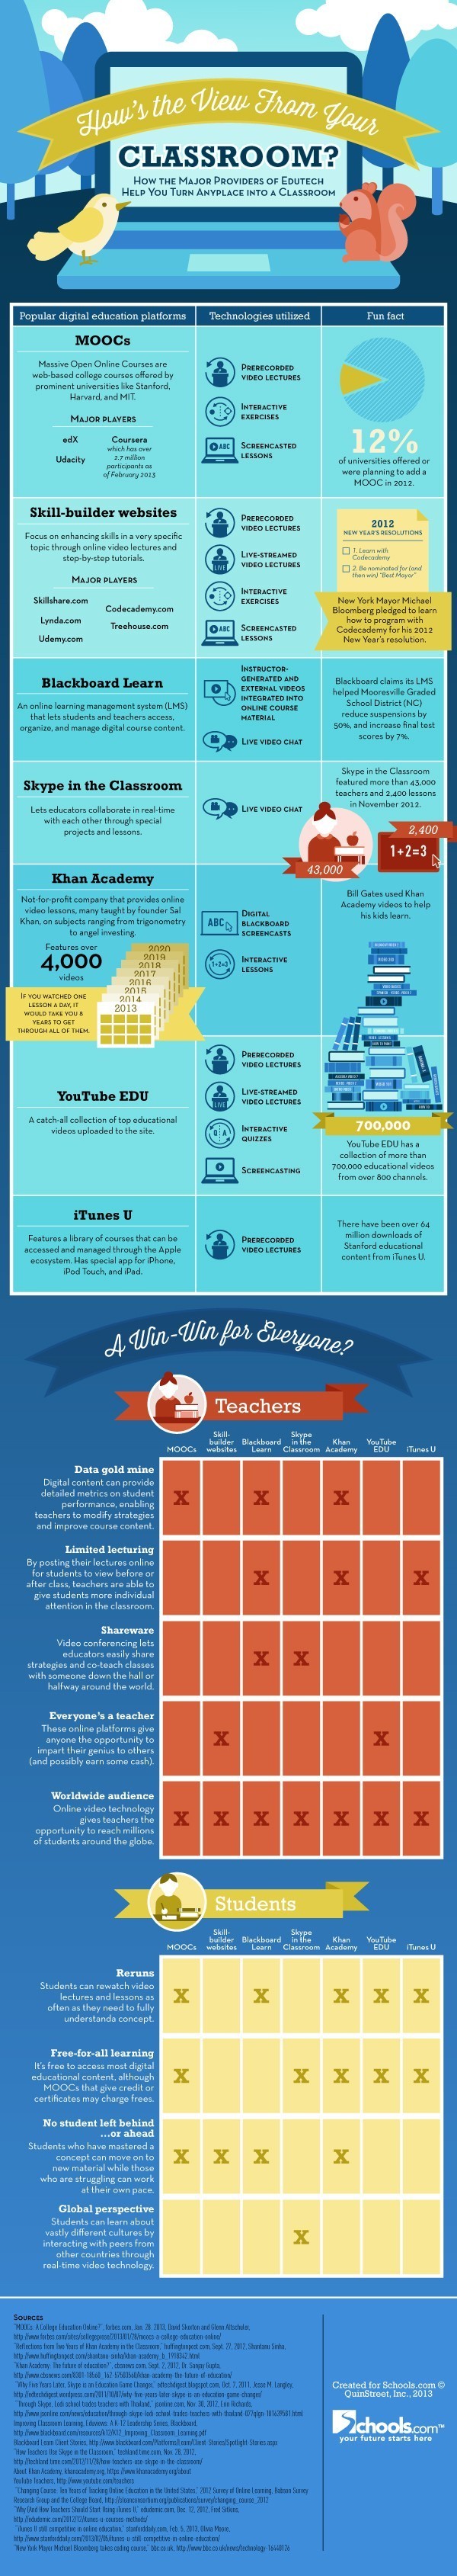 How-Digital-Education-Platforms-Change-How-We-Learn-Infographic